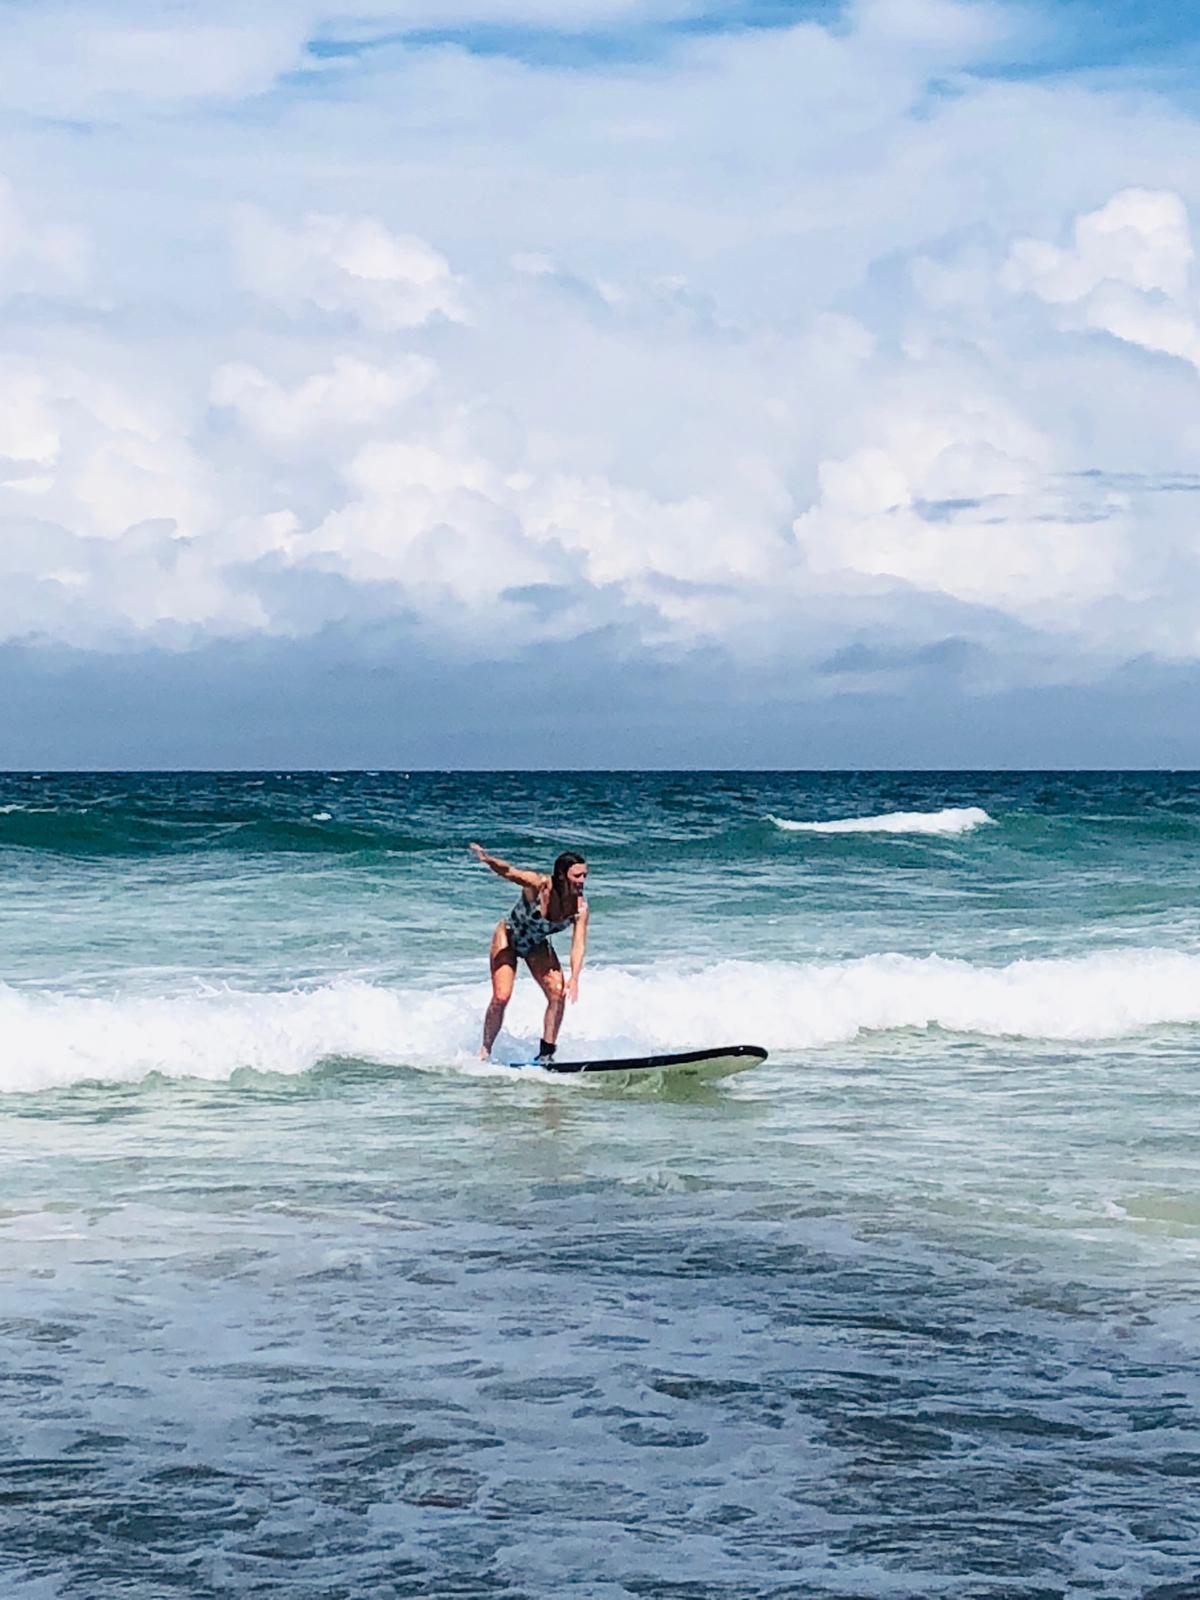 surfing for begginers and surfing lessons in the amazing byron bay surfing beaches